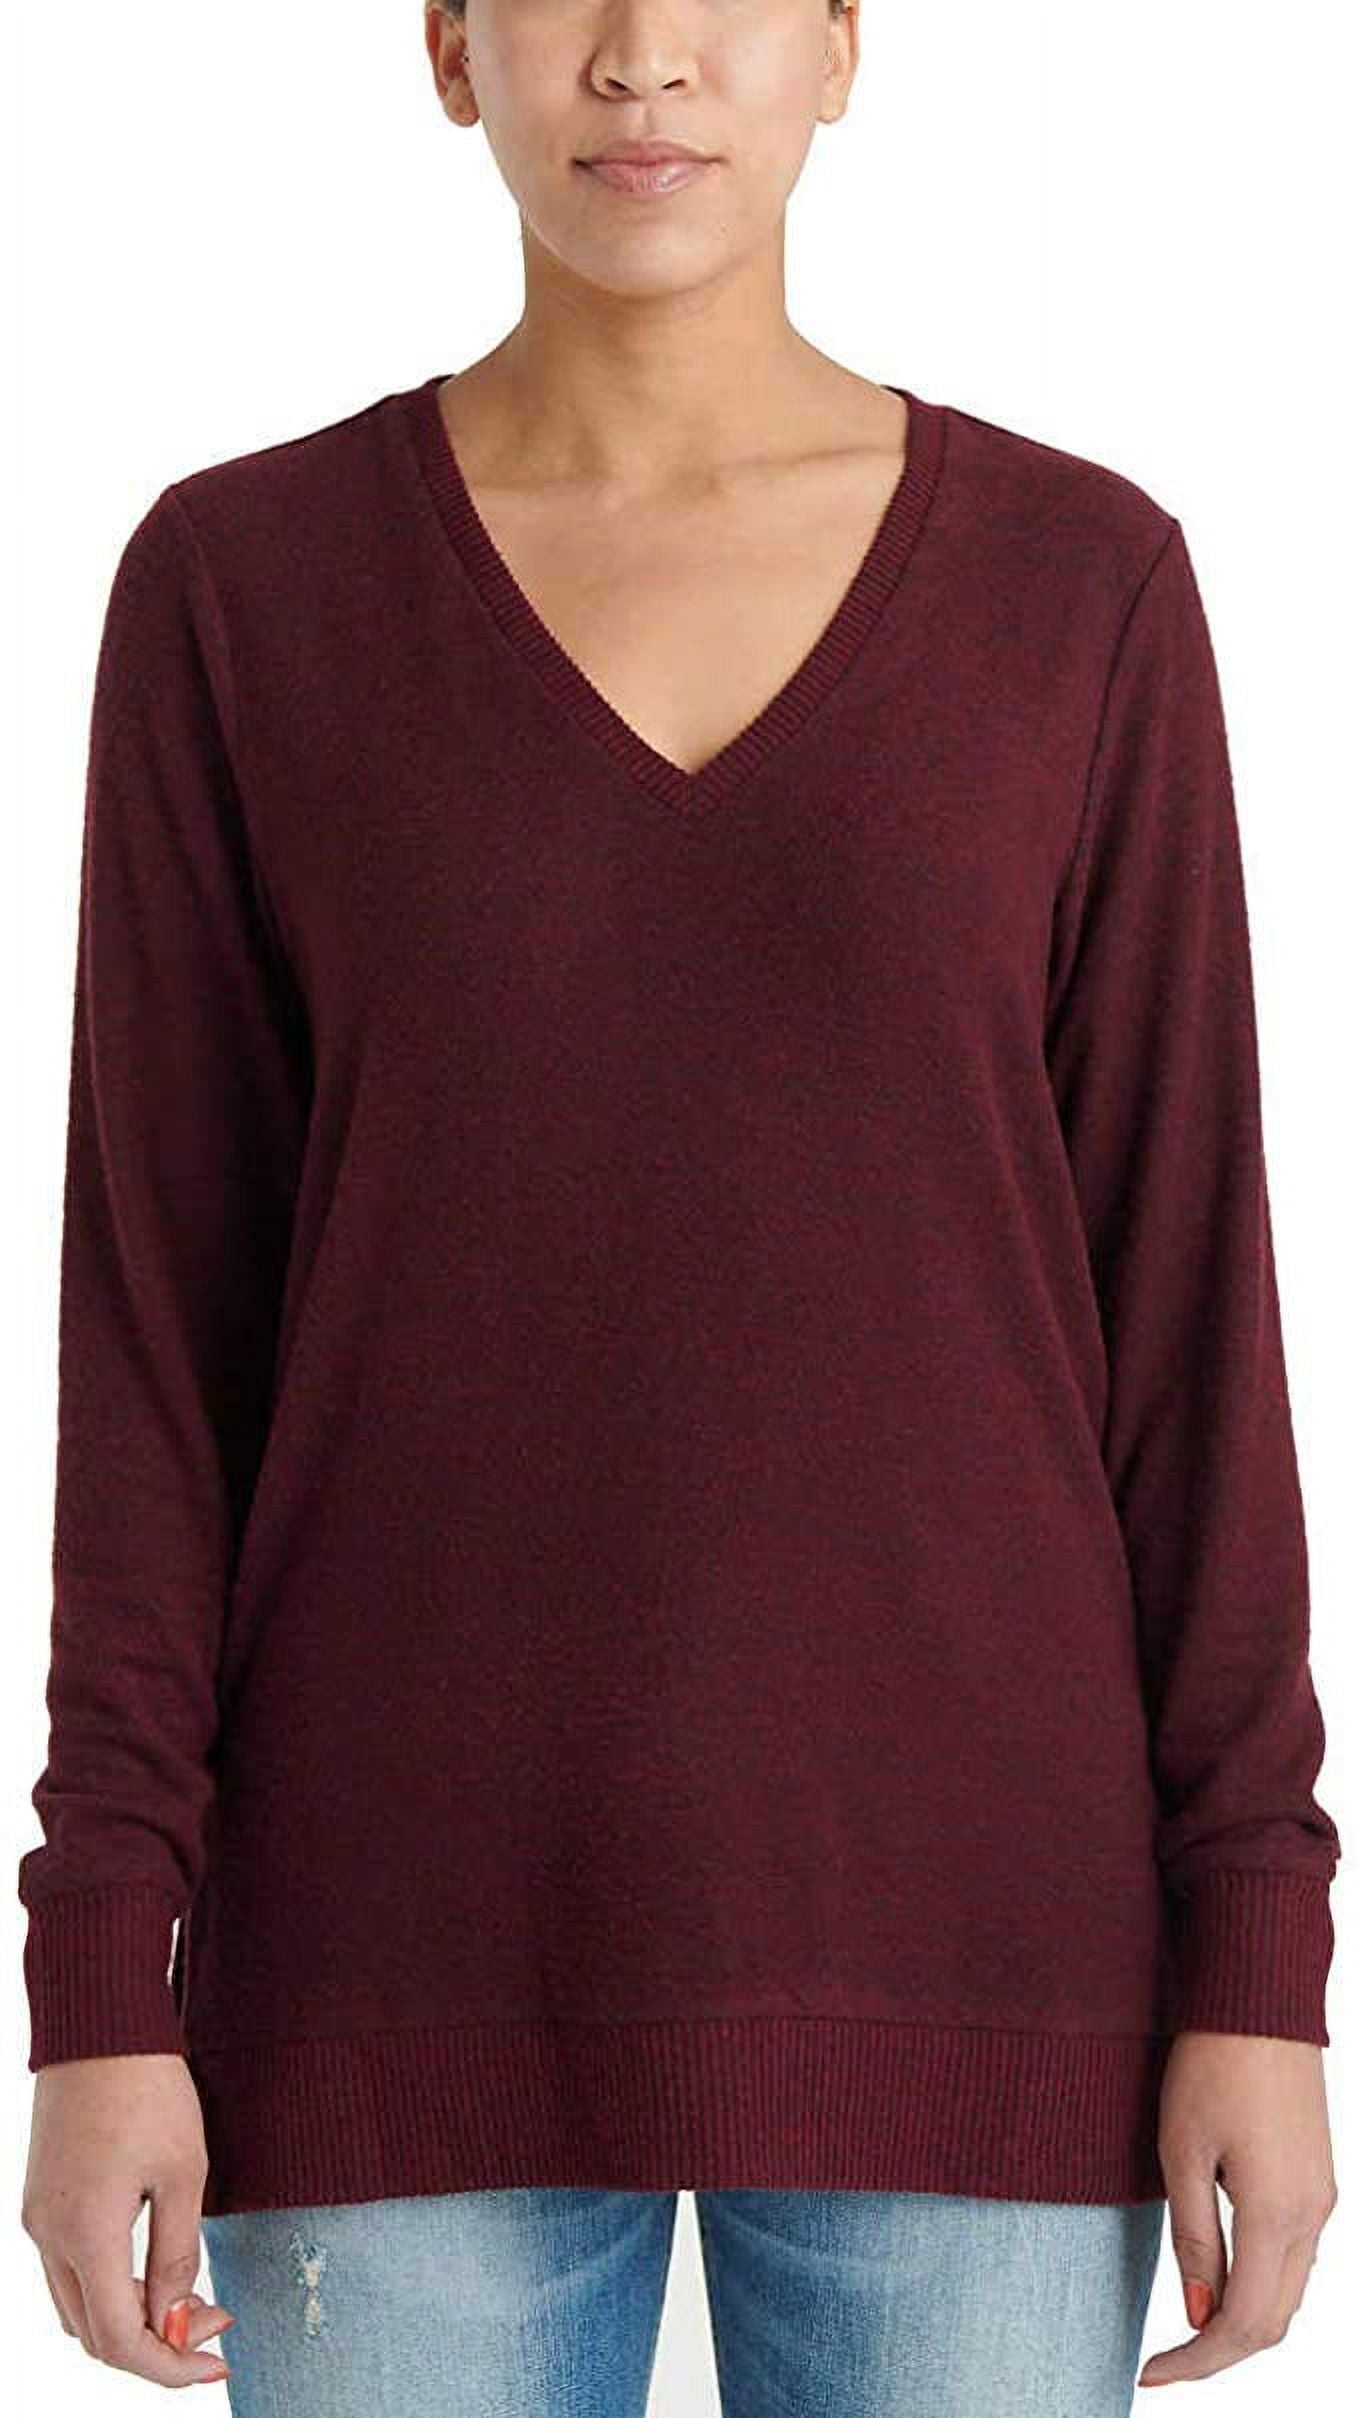 Lucky Brand Ladies' V-Neck Tunic Long Sleeves Pullover Light Sweater Wine S